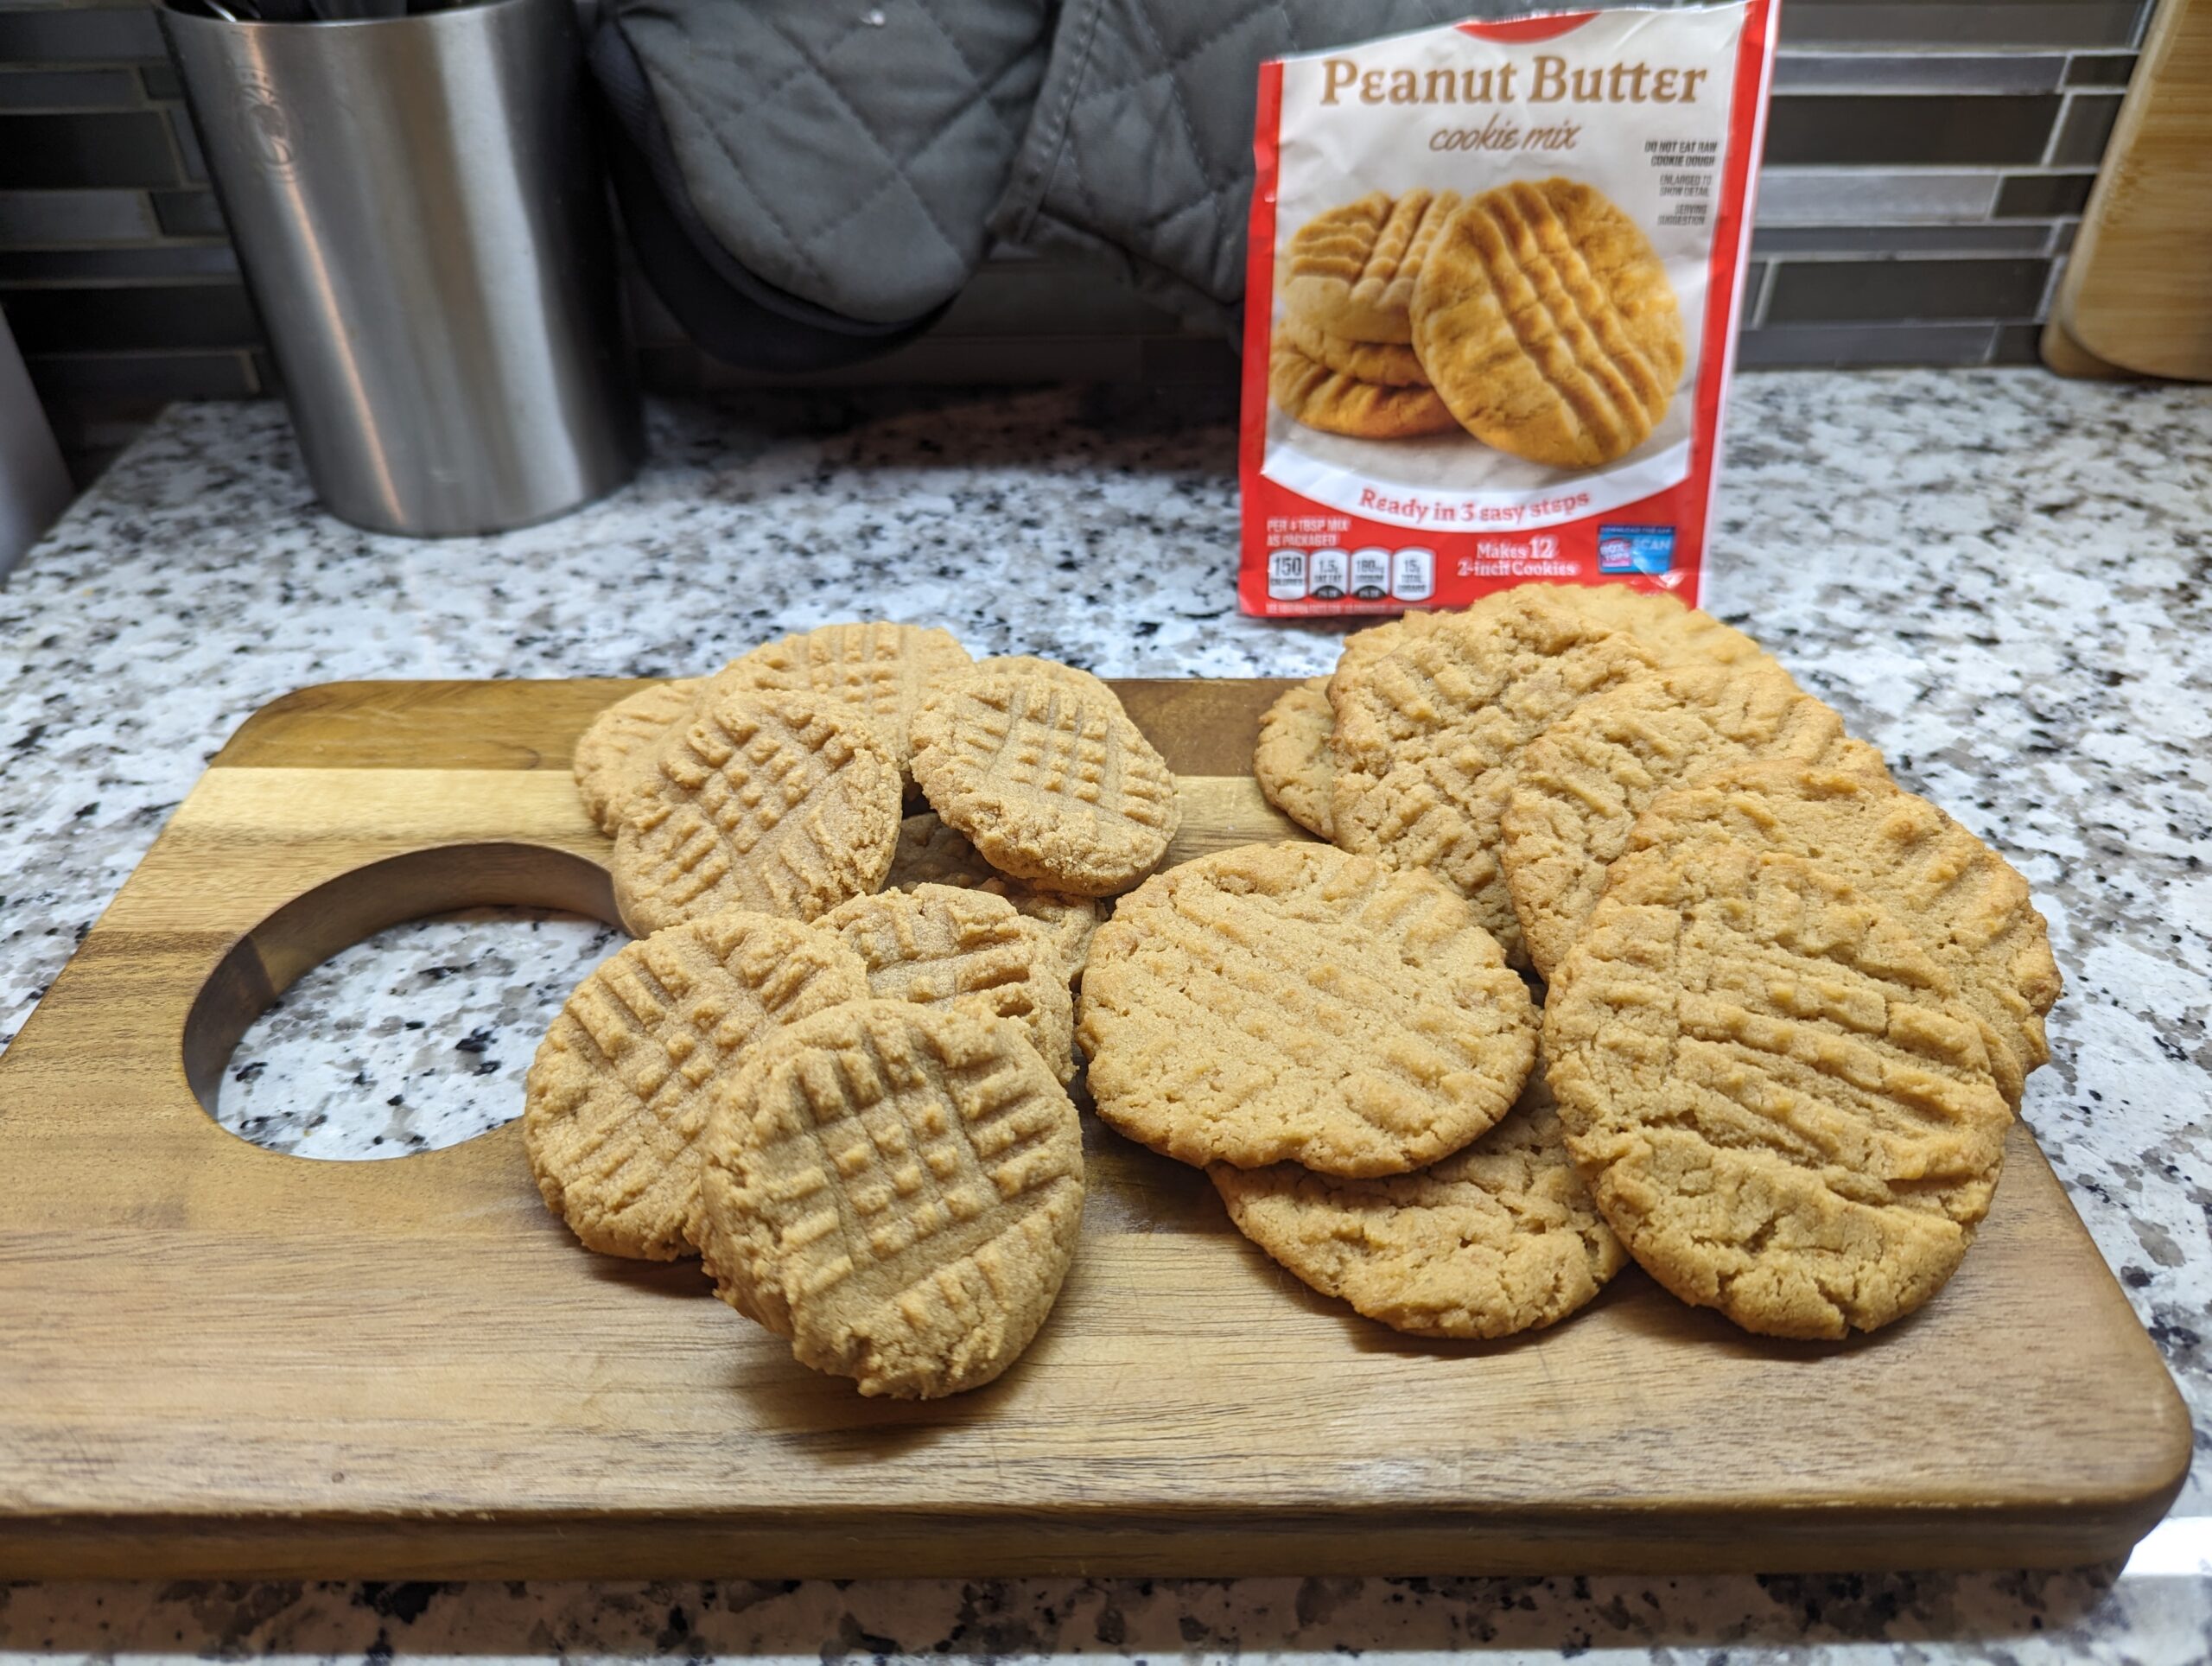 Comparing Betty Crocker’s Peanut Butter Cookie mix to homemade